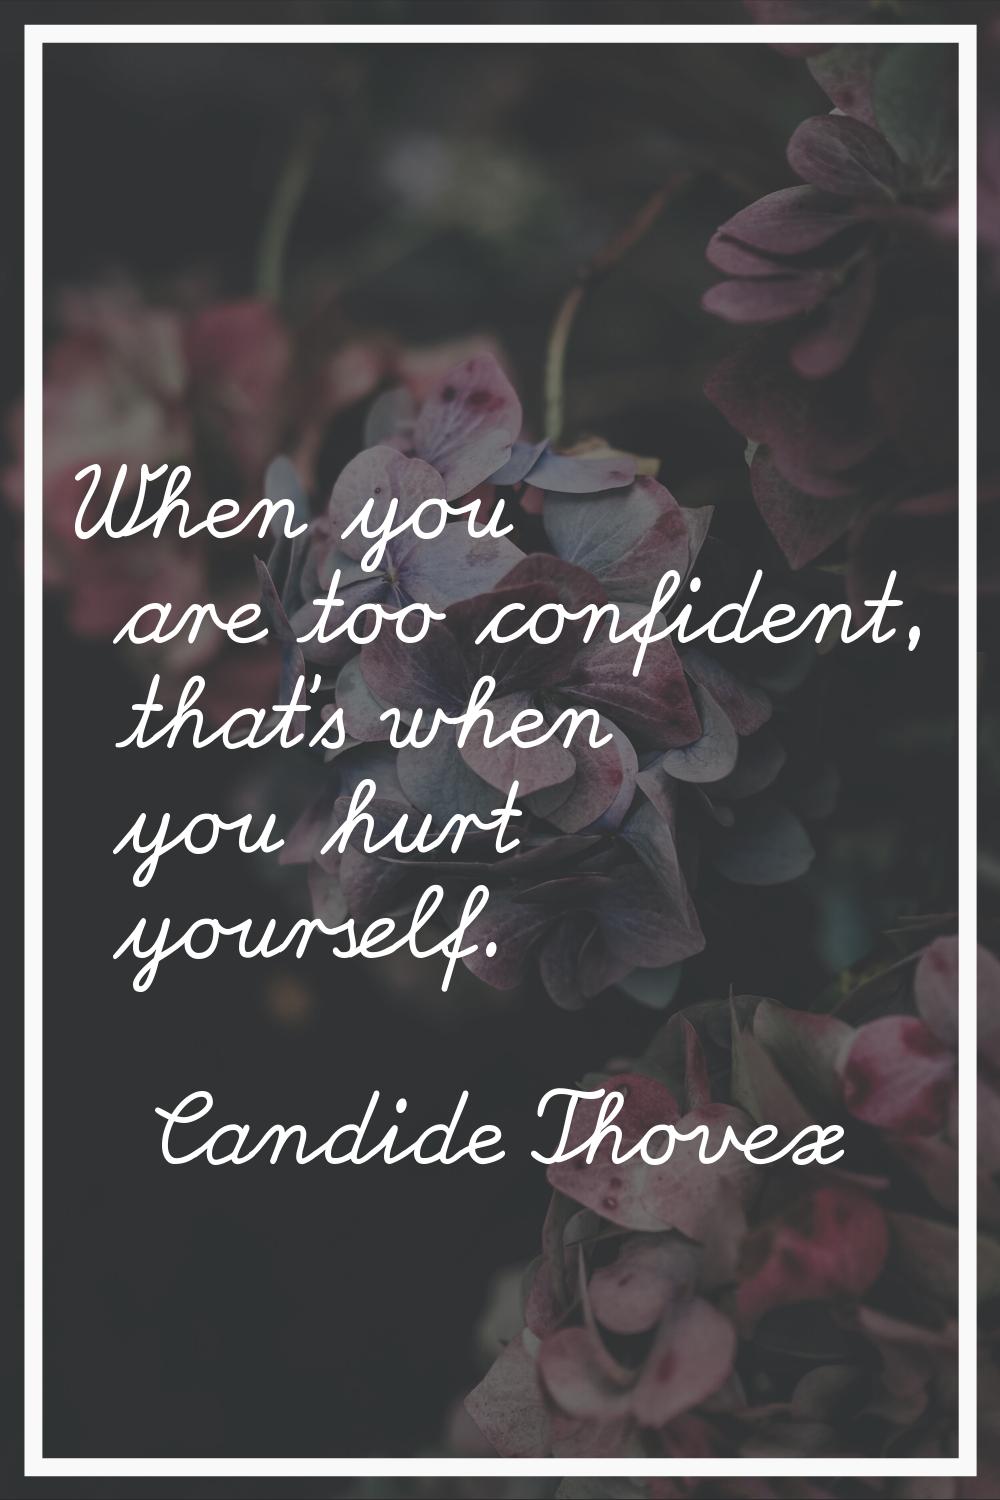 When you are too confident, that's when you hurt yourself.